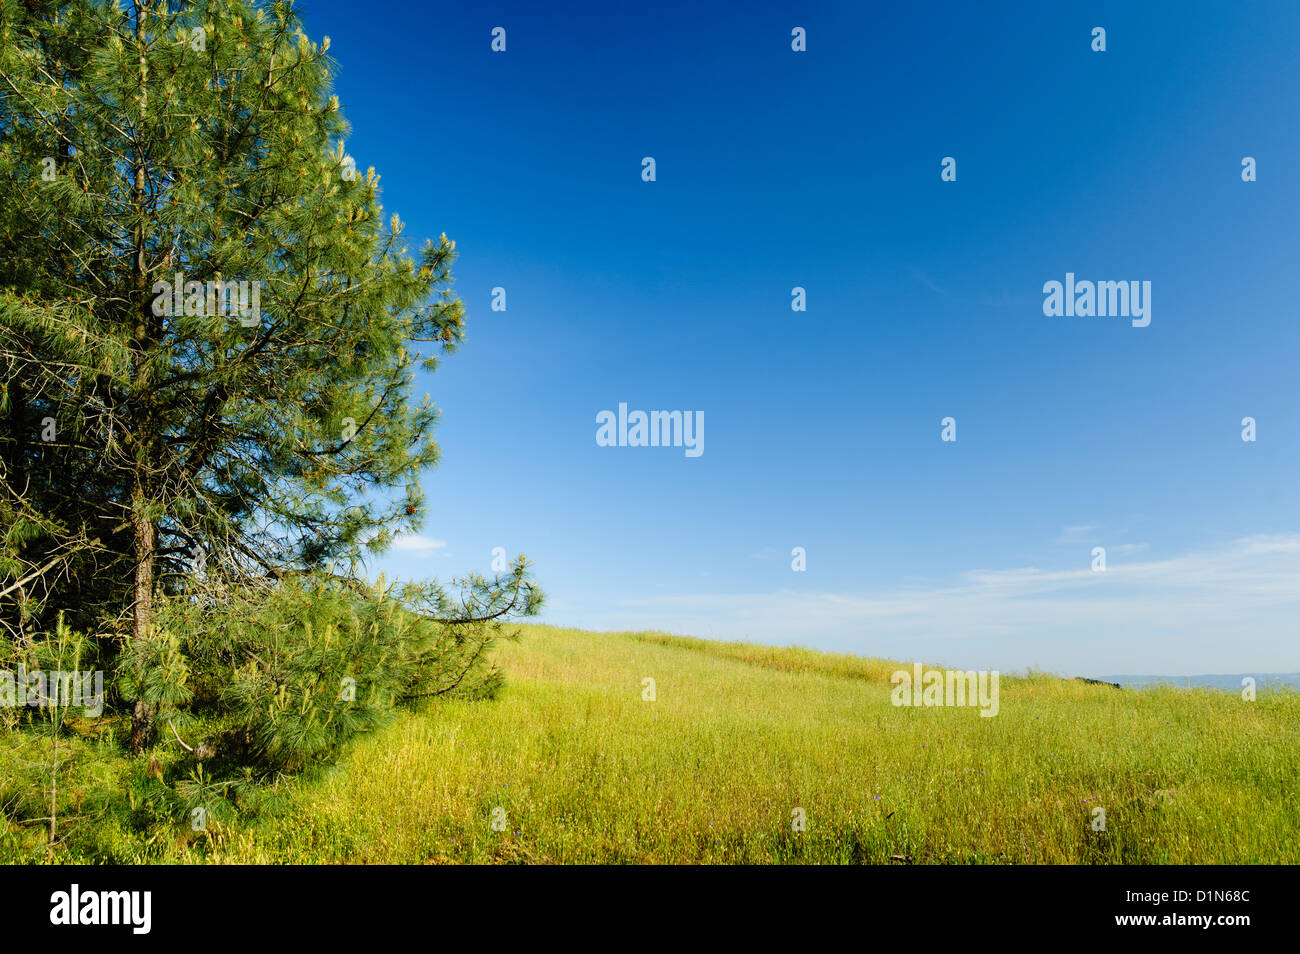 Gray Pine tree or Pinus sabiniana in a grassy meadow, Mount Diablo State Park, Contra Costa County, California, USA Stock Photo